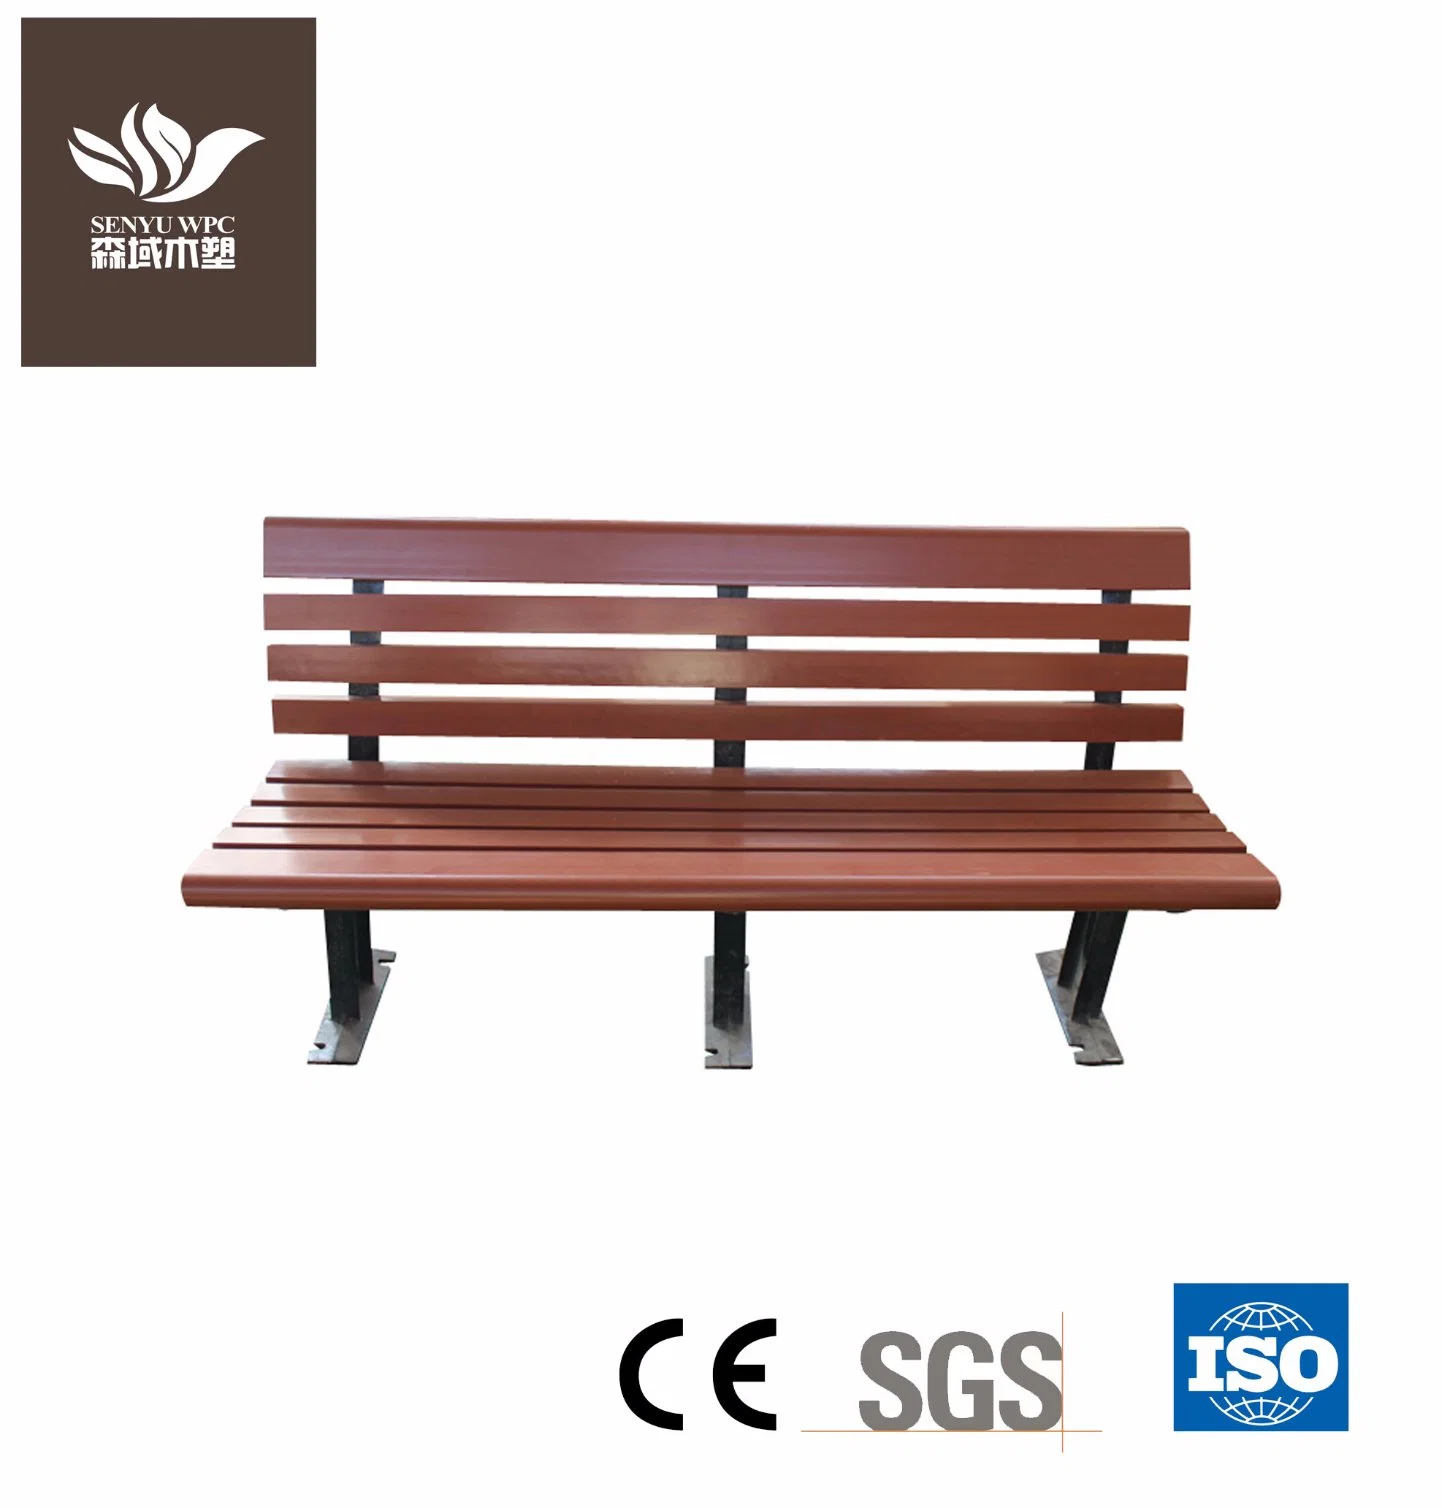 Park Outdoor Furniture WPC Bench Chair